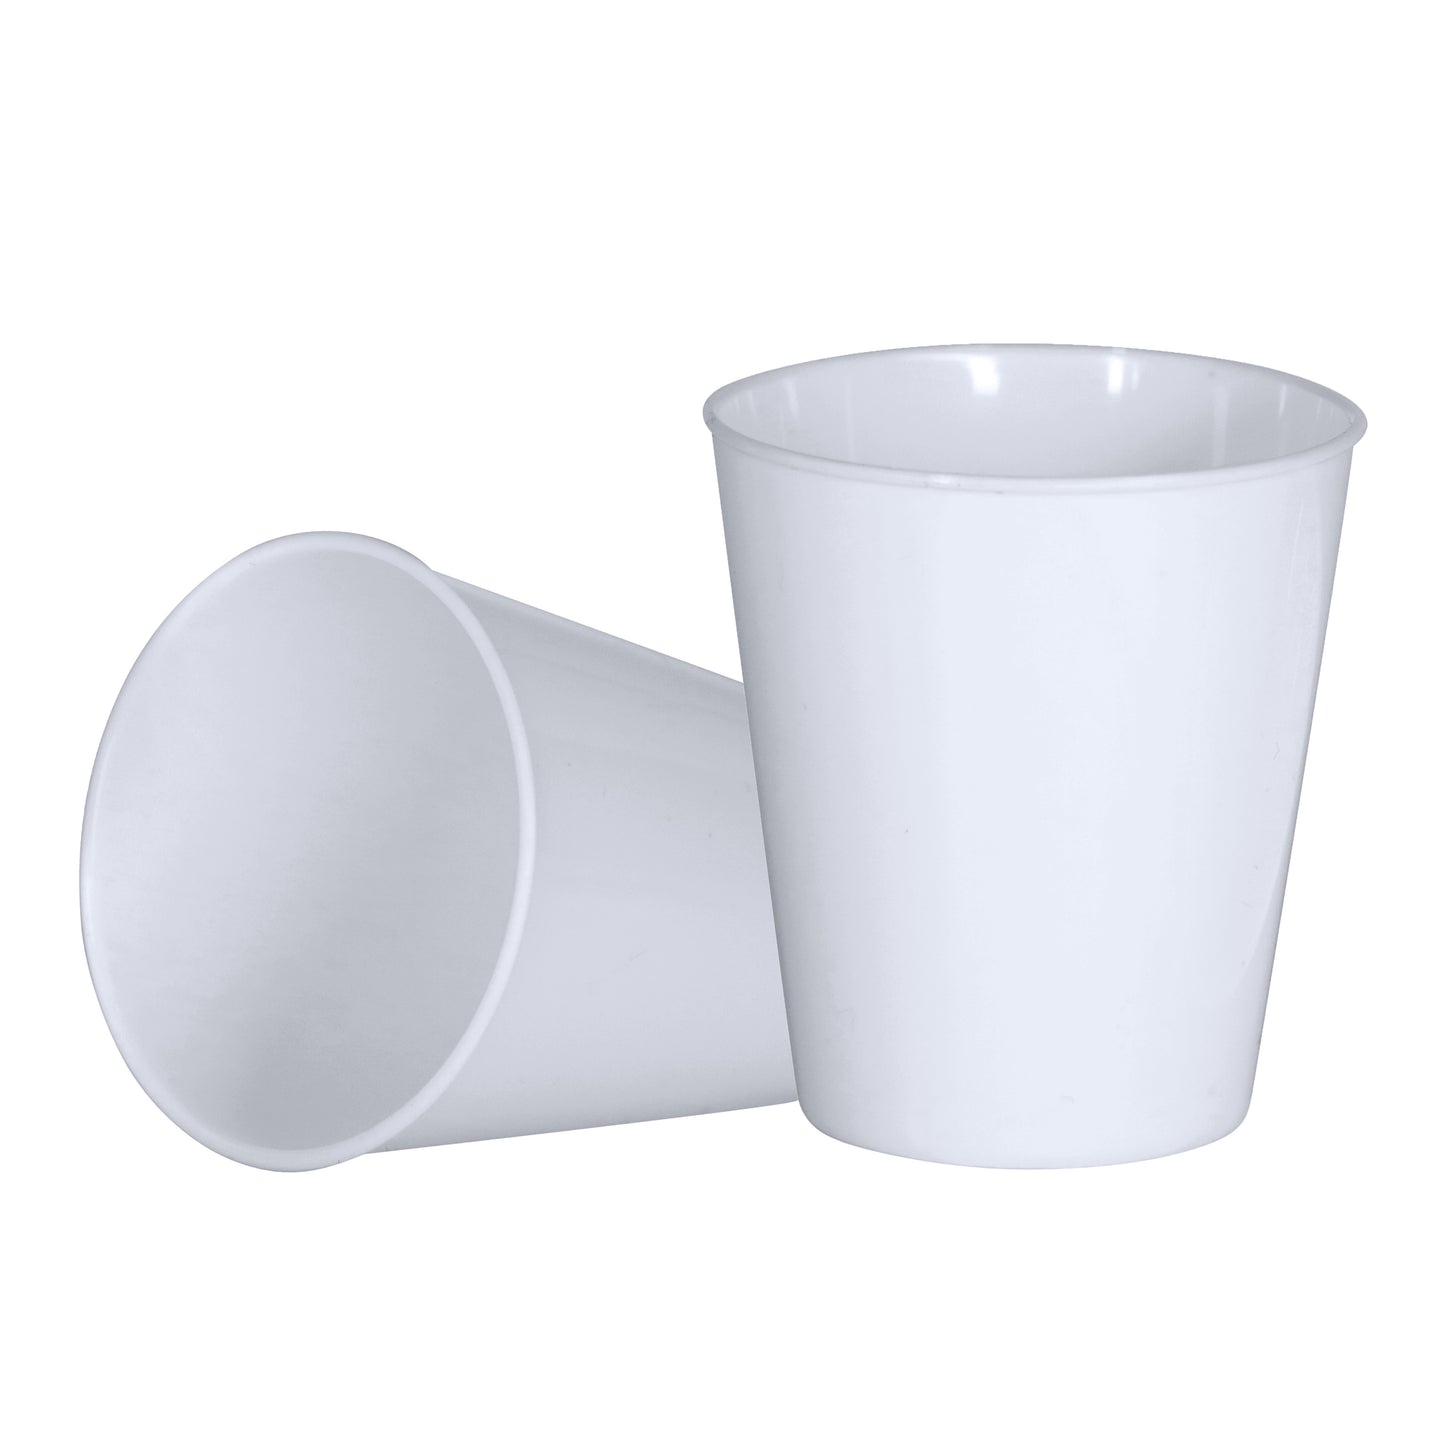 Pack of 36 x White Shot Glasses Biodegradable Material Plastic 3cl 30ml Stackable Liquor, Spirits, Food Sampling, Parties, Jelly Shots